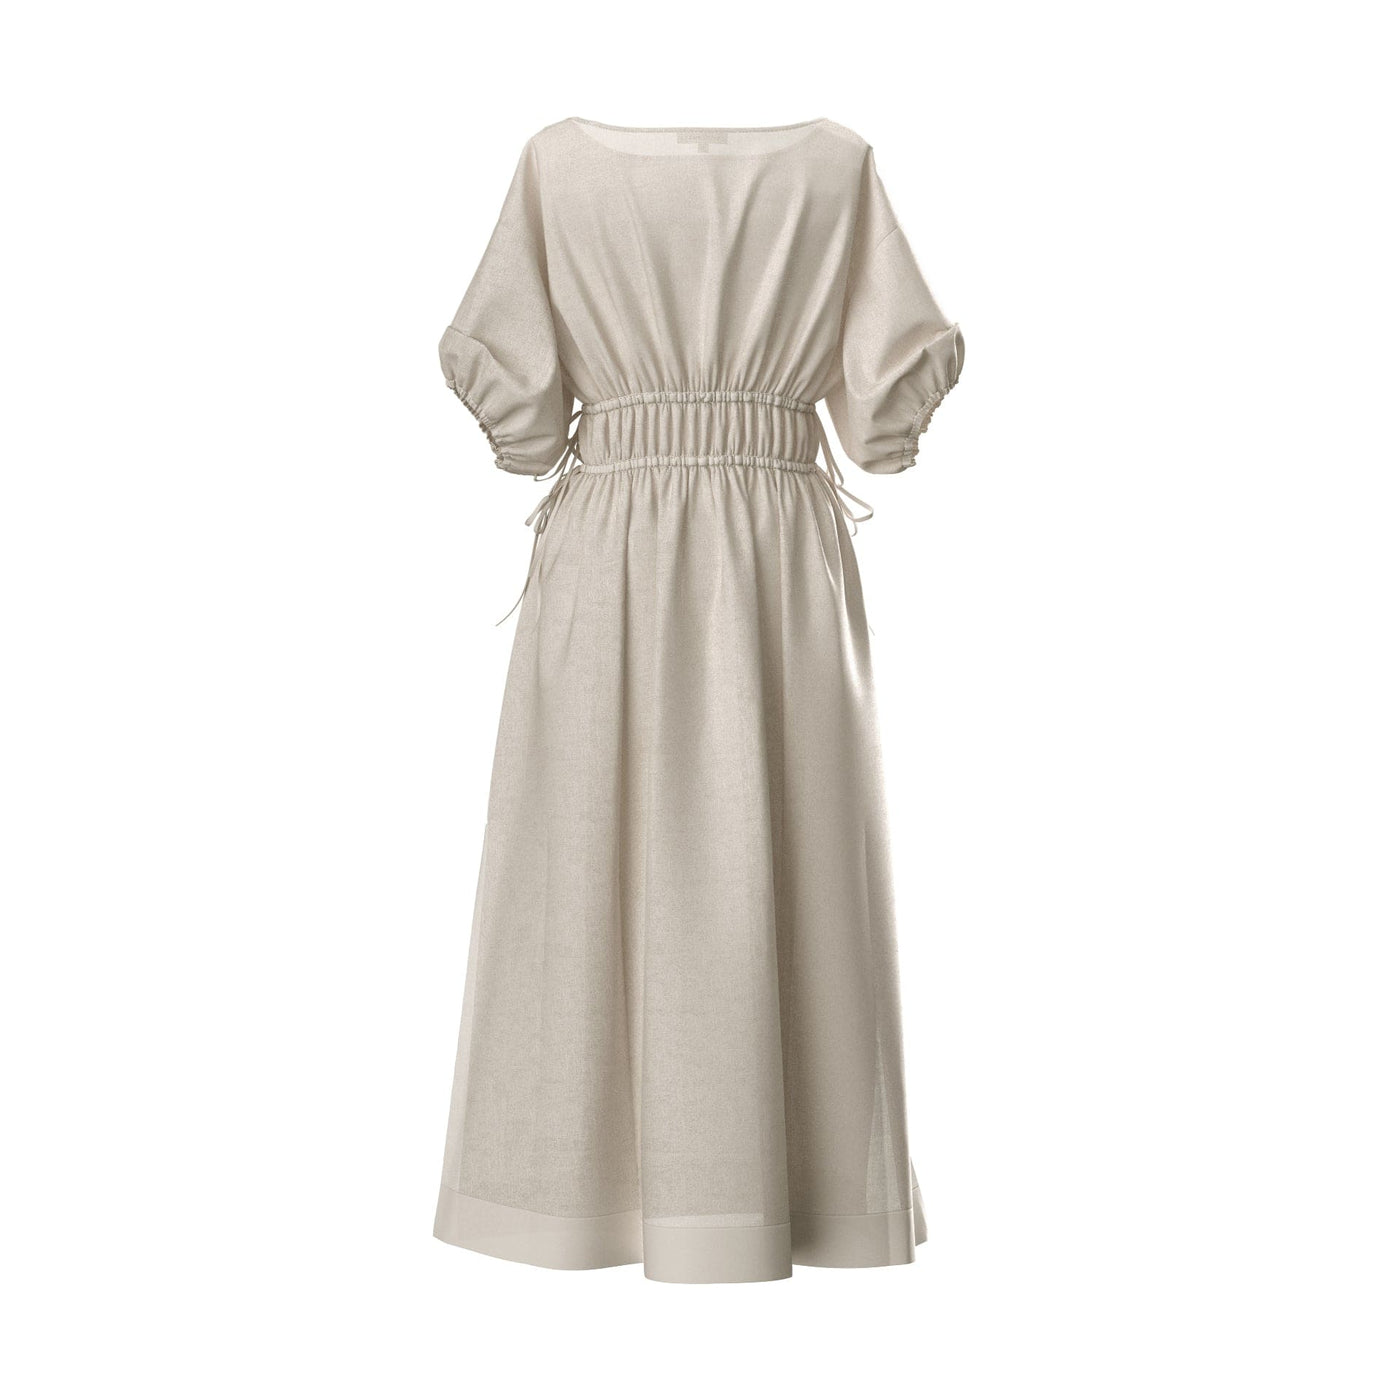 Lilly Pilly Collection Valerie dress made from 100% Organic linen in Ivory, as 3D model showing back view